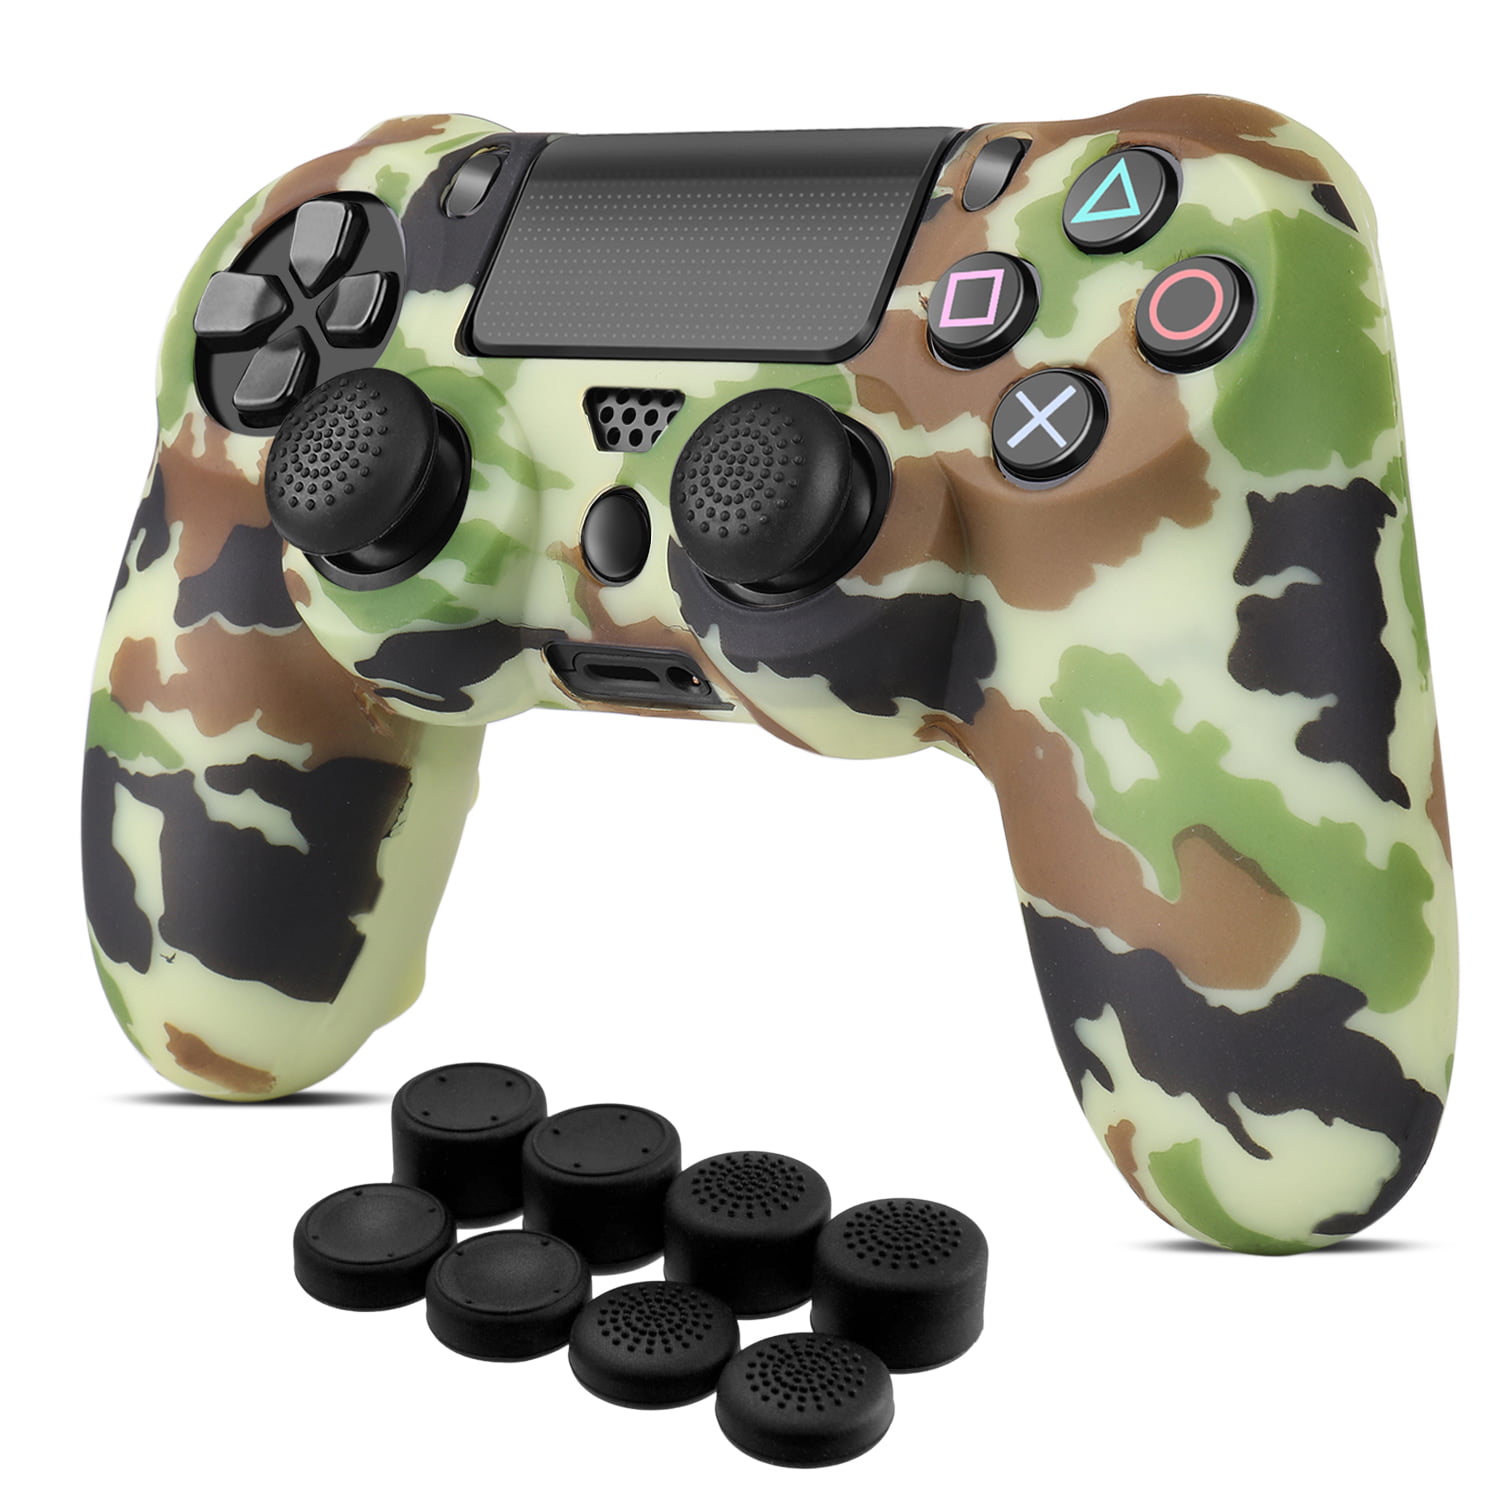 PS4 / Slim / Pro Controller Skin Grip Cover Set - Protective Soft Silicone Gel Rubber Shell & Anti-slip Thumb Stick for PlayStation 4 Controller Gamepad (Camo Orange) - Walmart.com